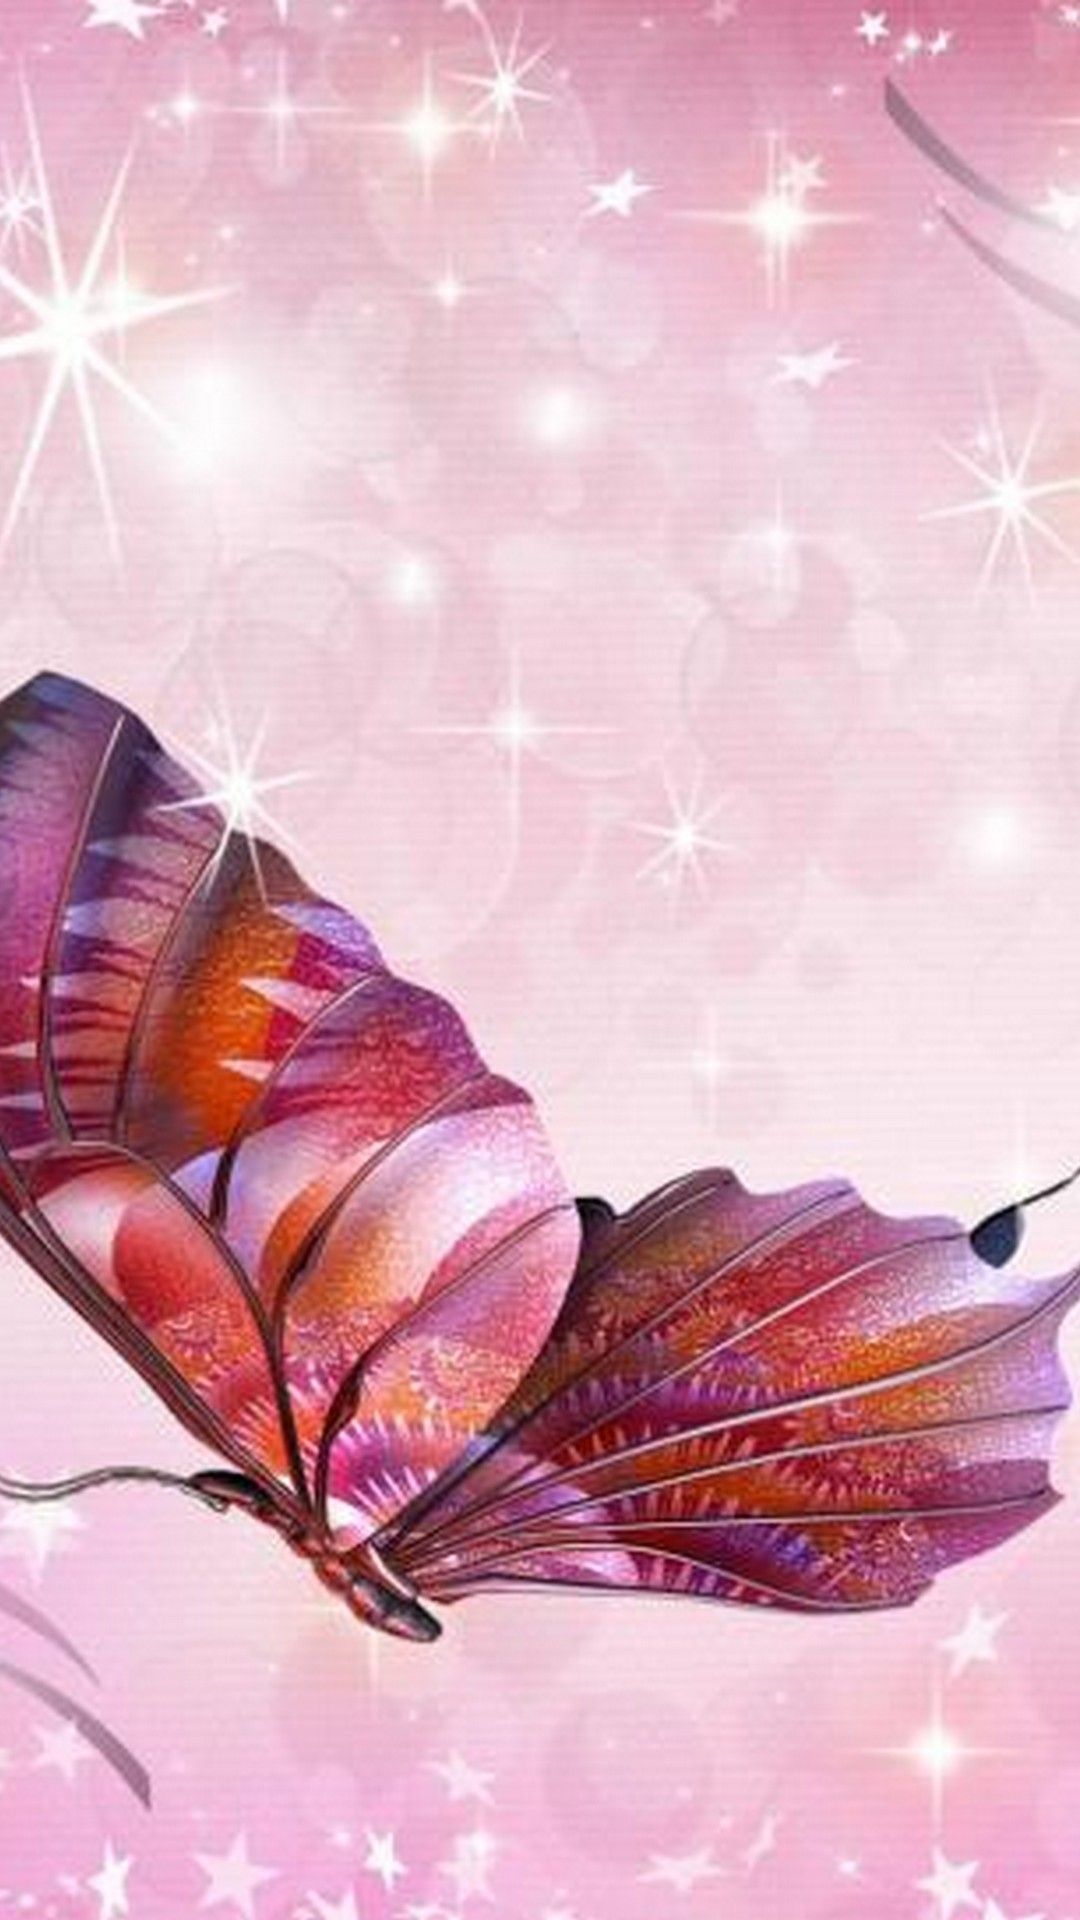 Pink Butterfly Wallpaper For Mobile Android. Best HD Wallpaper. Android wallpaper black, Cute black wallpaper, Mobile wallpaper android